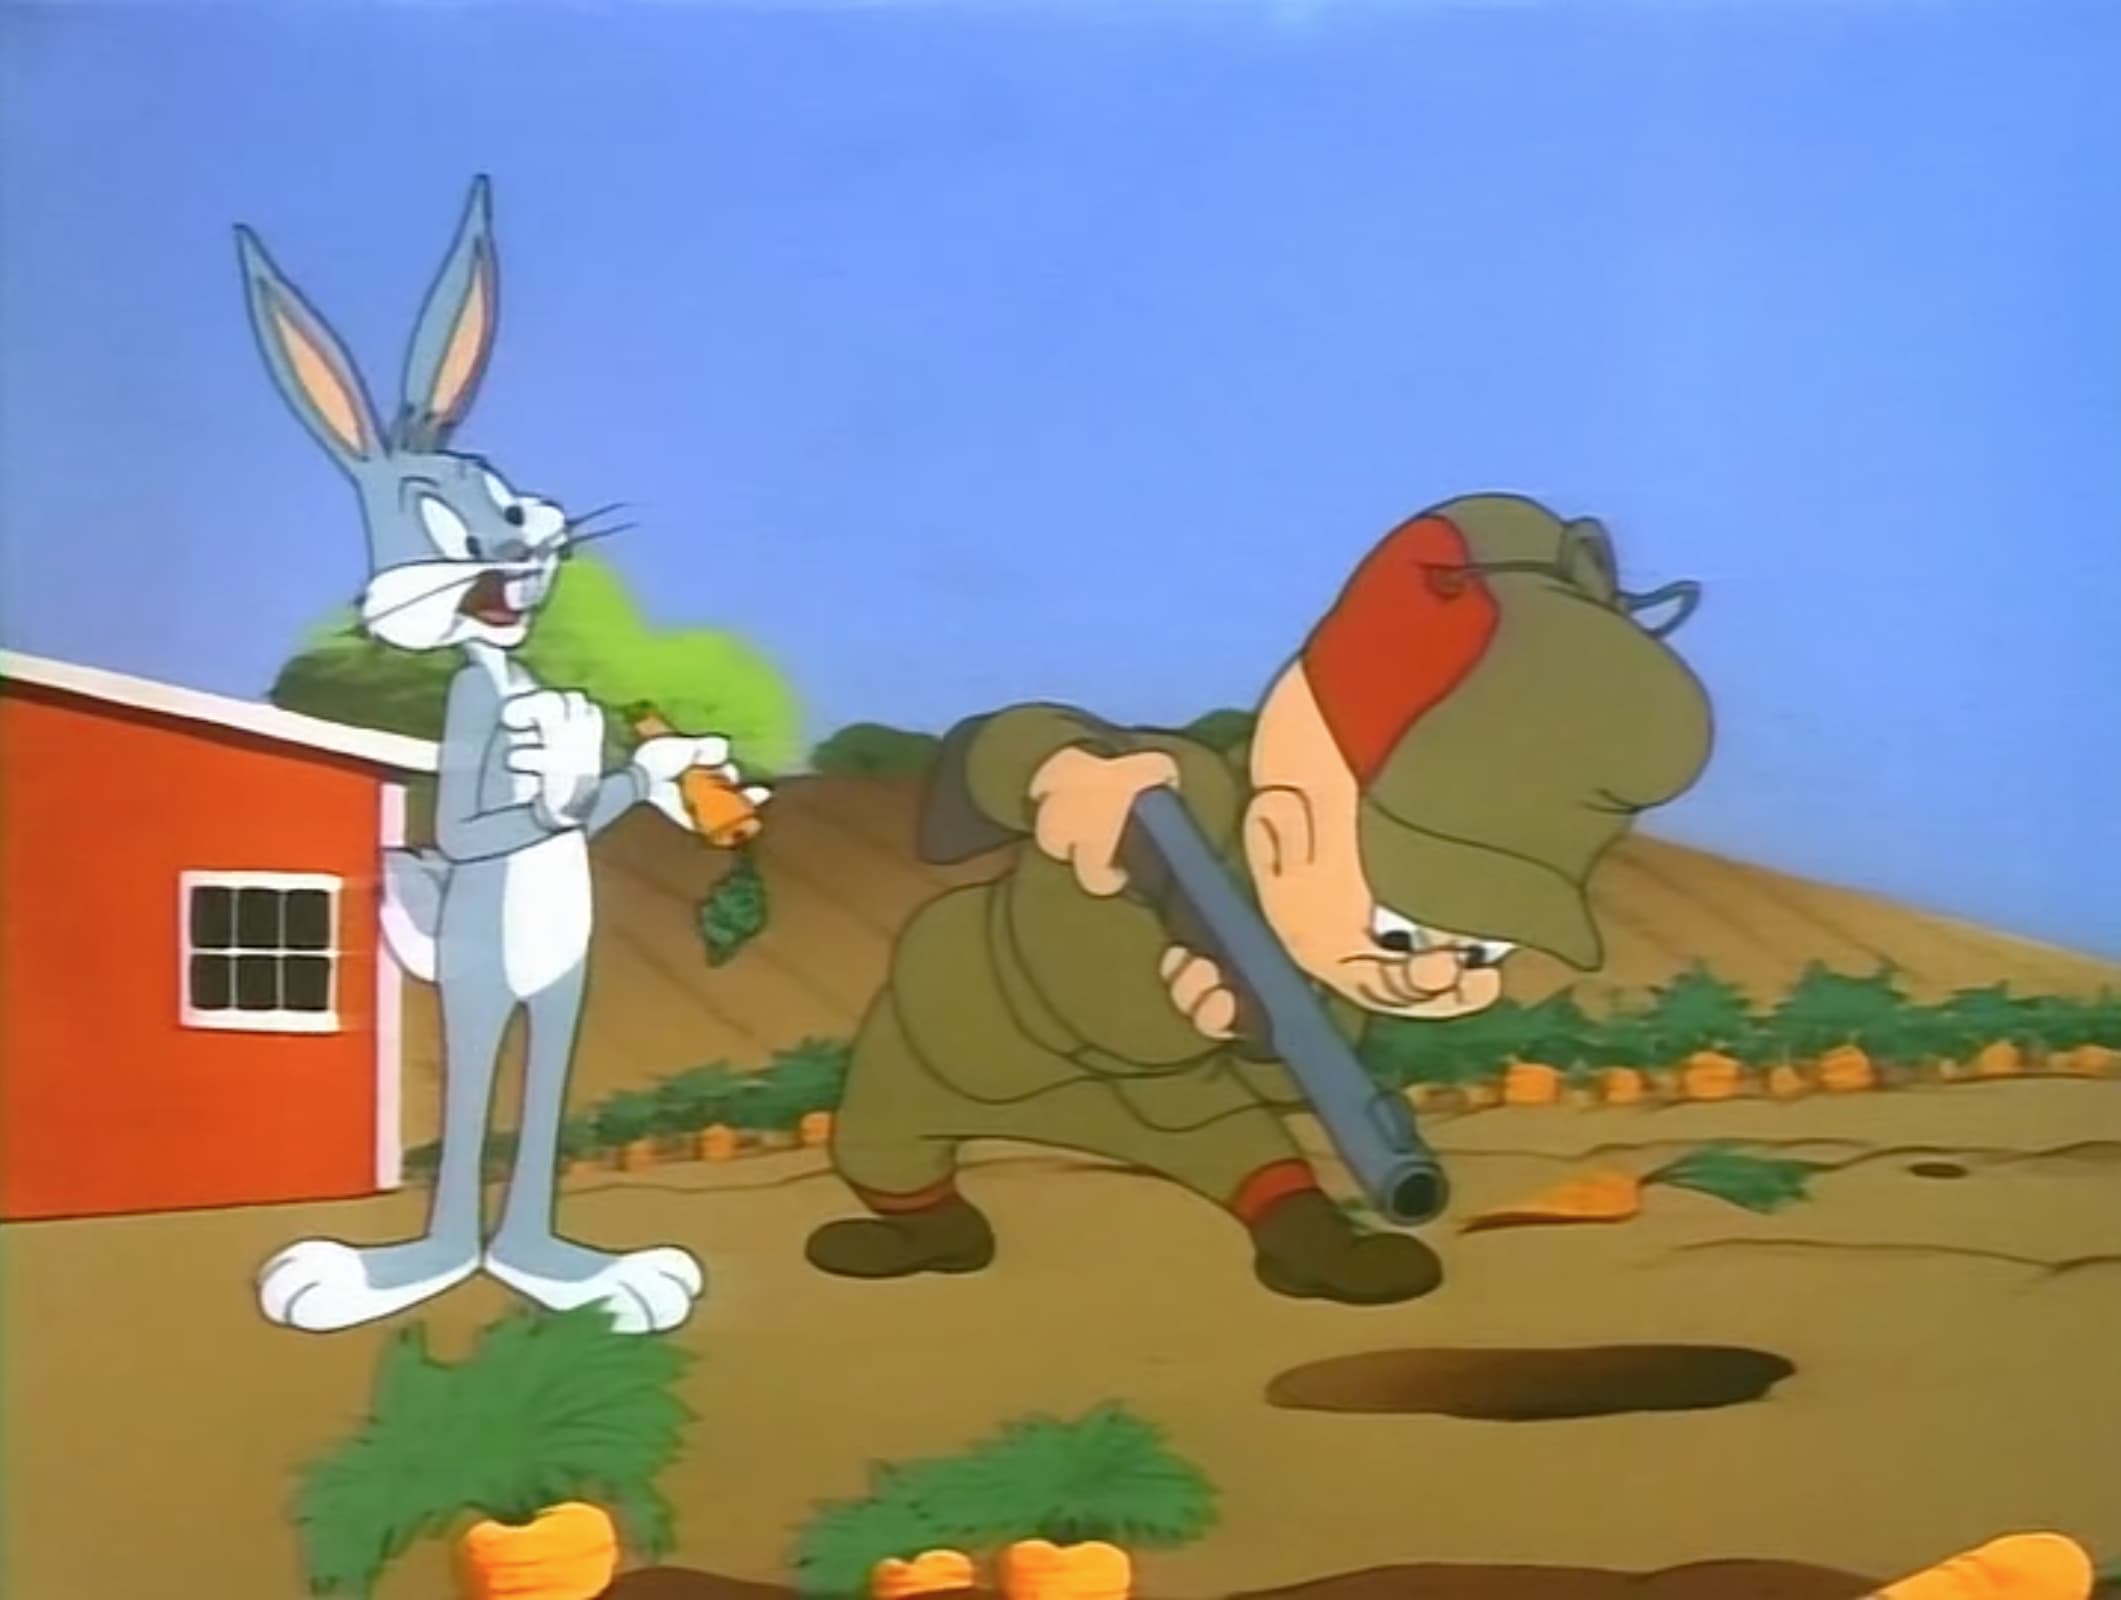 pictures of elmer fudd and bugs bunny